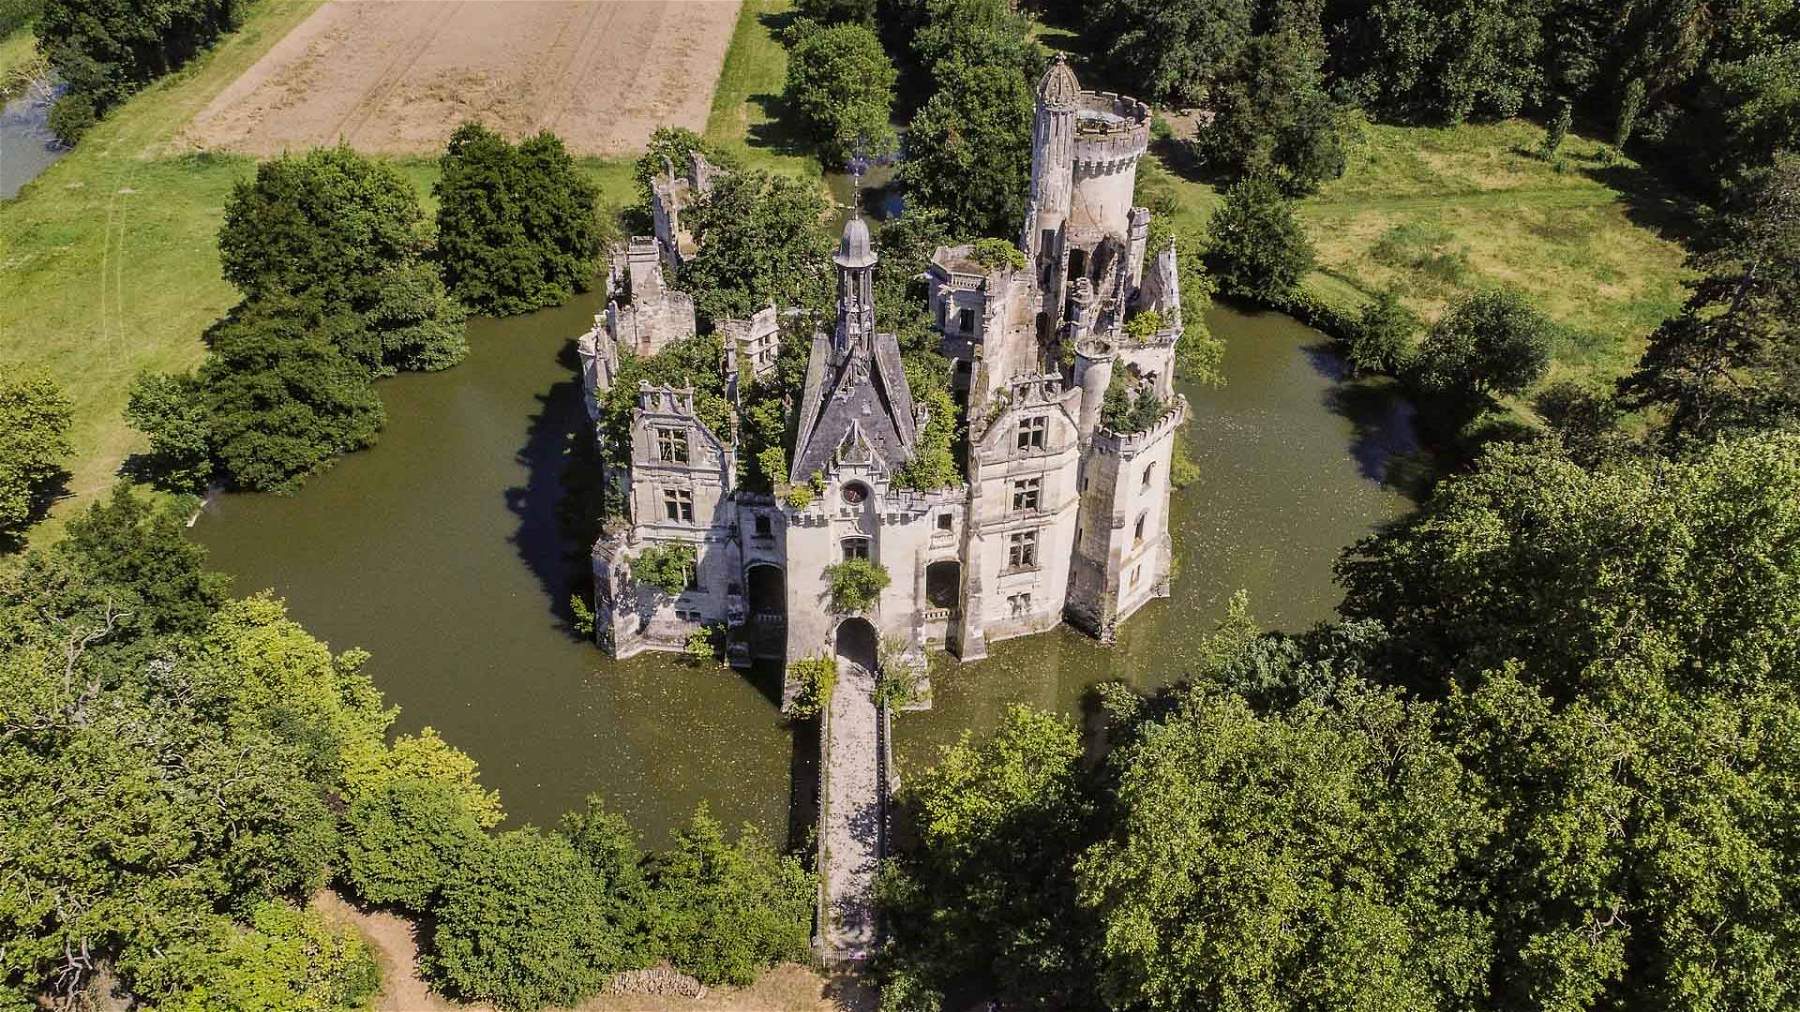 France, one of the most beautiful chÃ¢teaux of the Loire reclaimed thanks to a popular shareholding